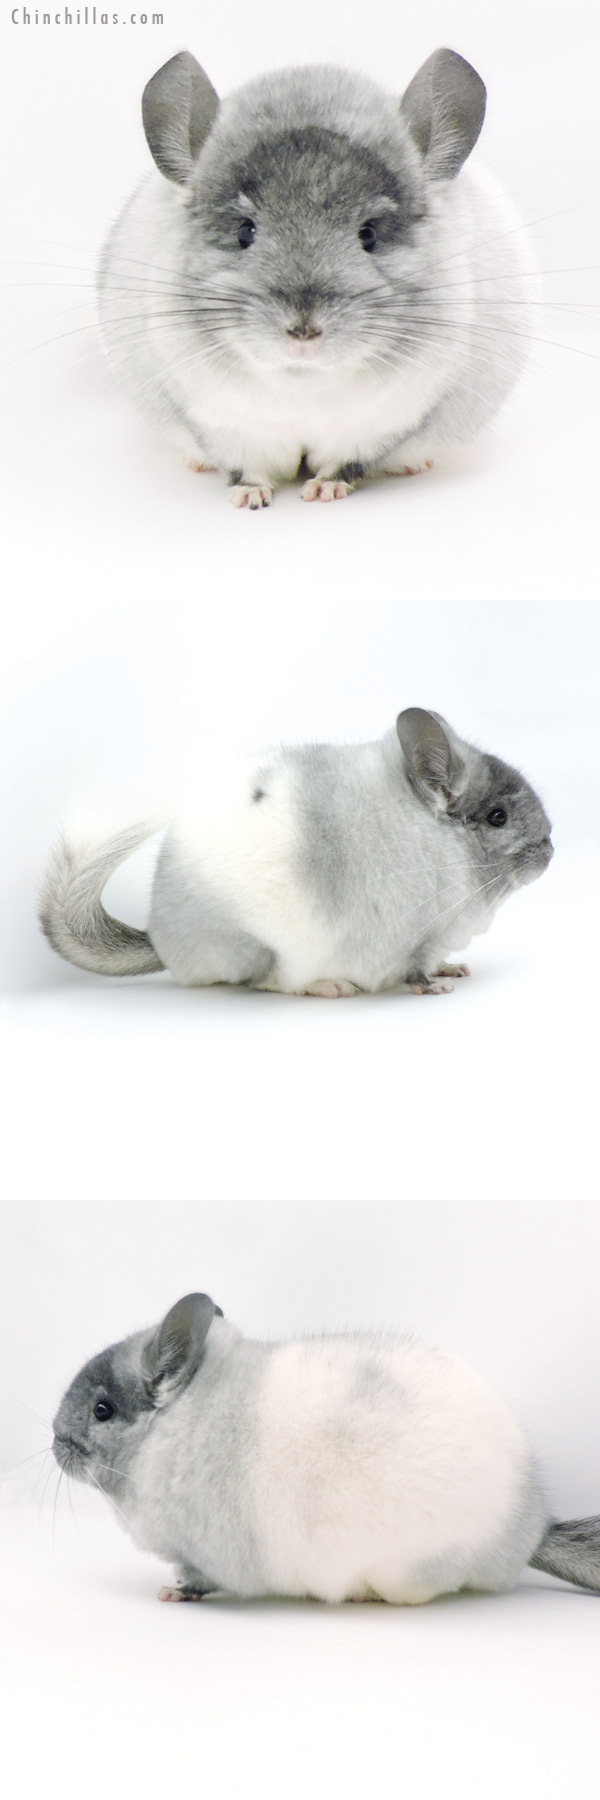 Chinchilla or related item offered for sale or export on Chinchillas.com - 19321 Blocky Brevi Type Herd Improvement Quality TOV White Male Chinchilla